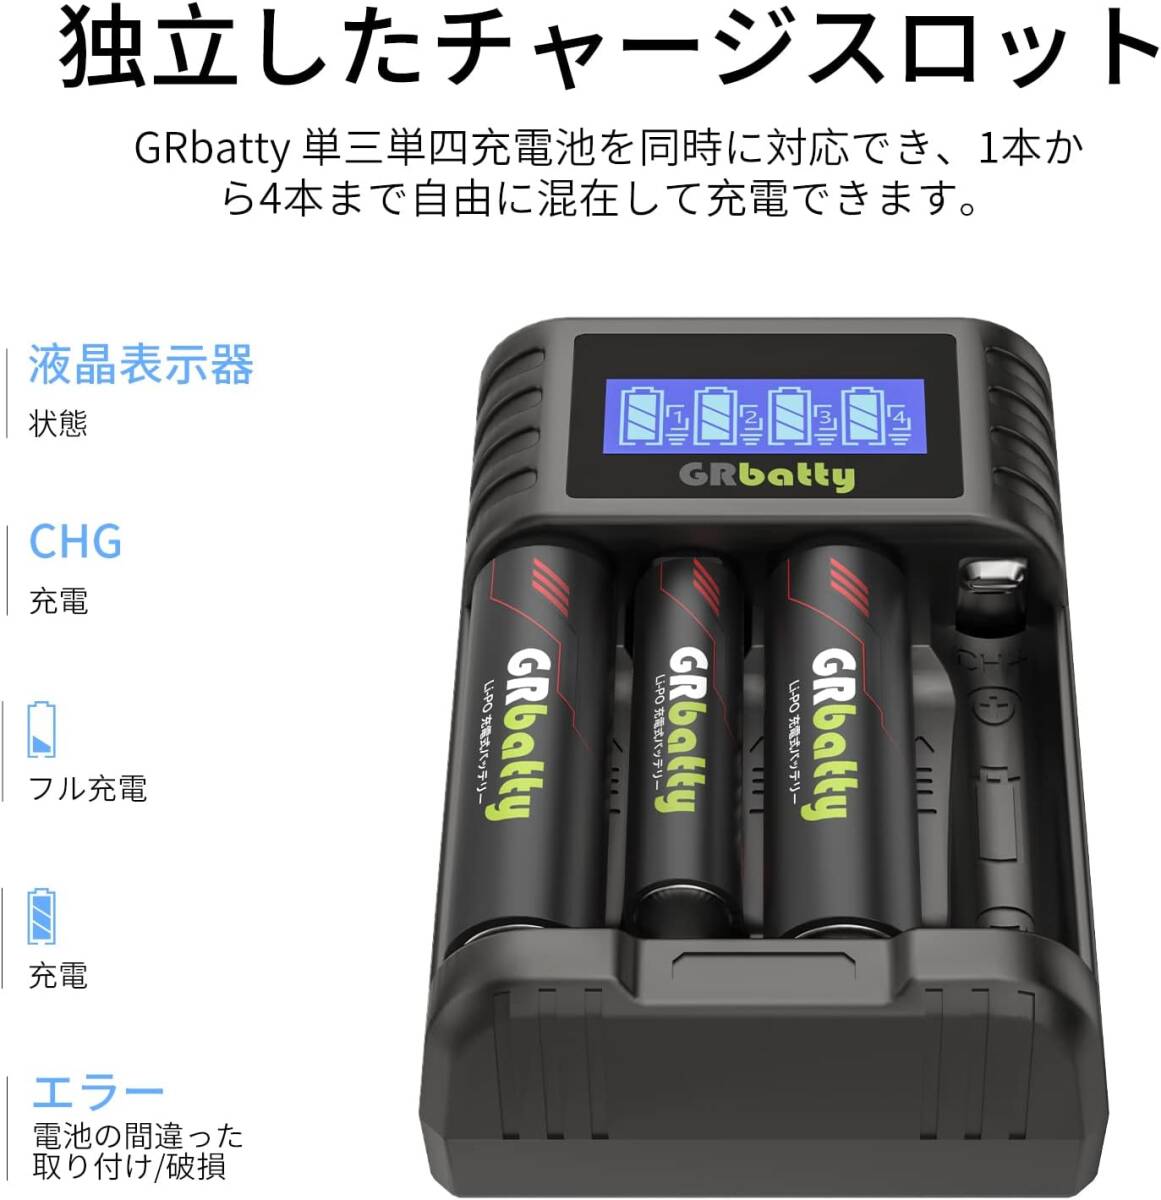 515 charger + single 3 shape lithium battery *4 GRbatty lithium single 3 rechargeable battery single 3 shape charger set charger set liquid crystal screen 4 slot charge 